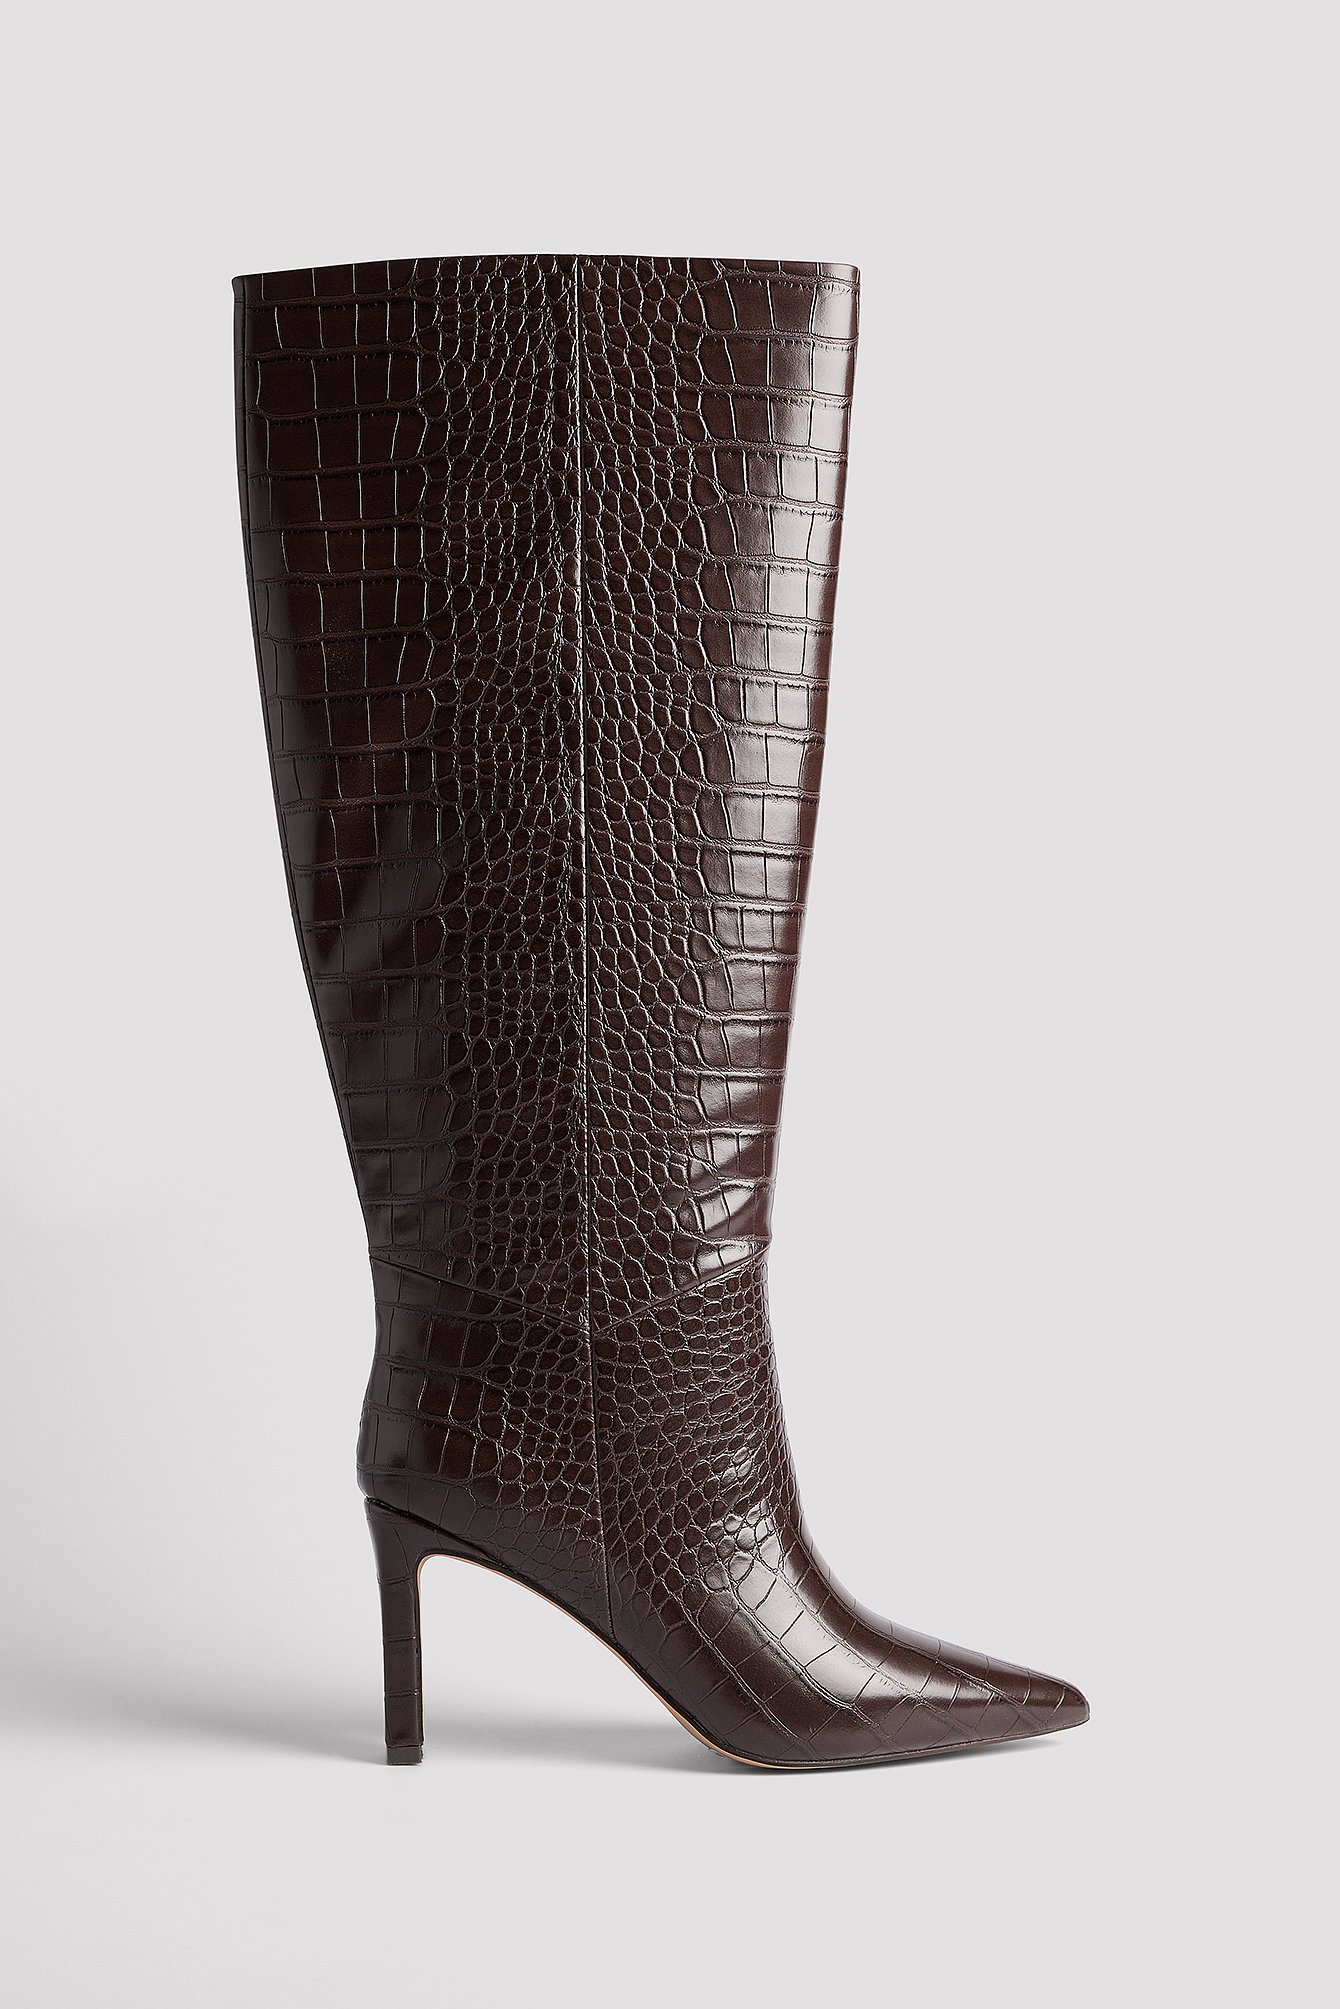 Croc Pointy Toe Boots